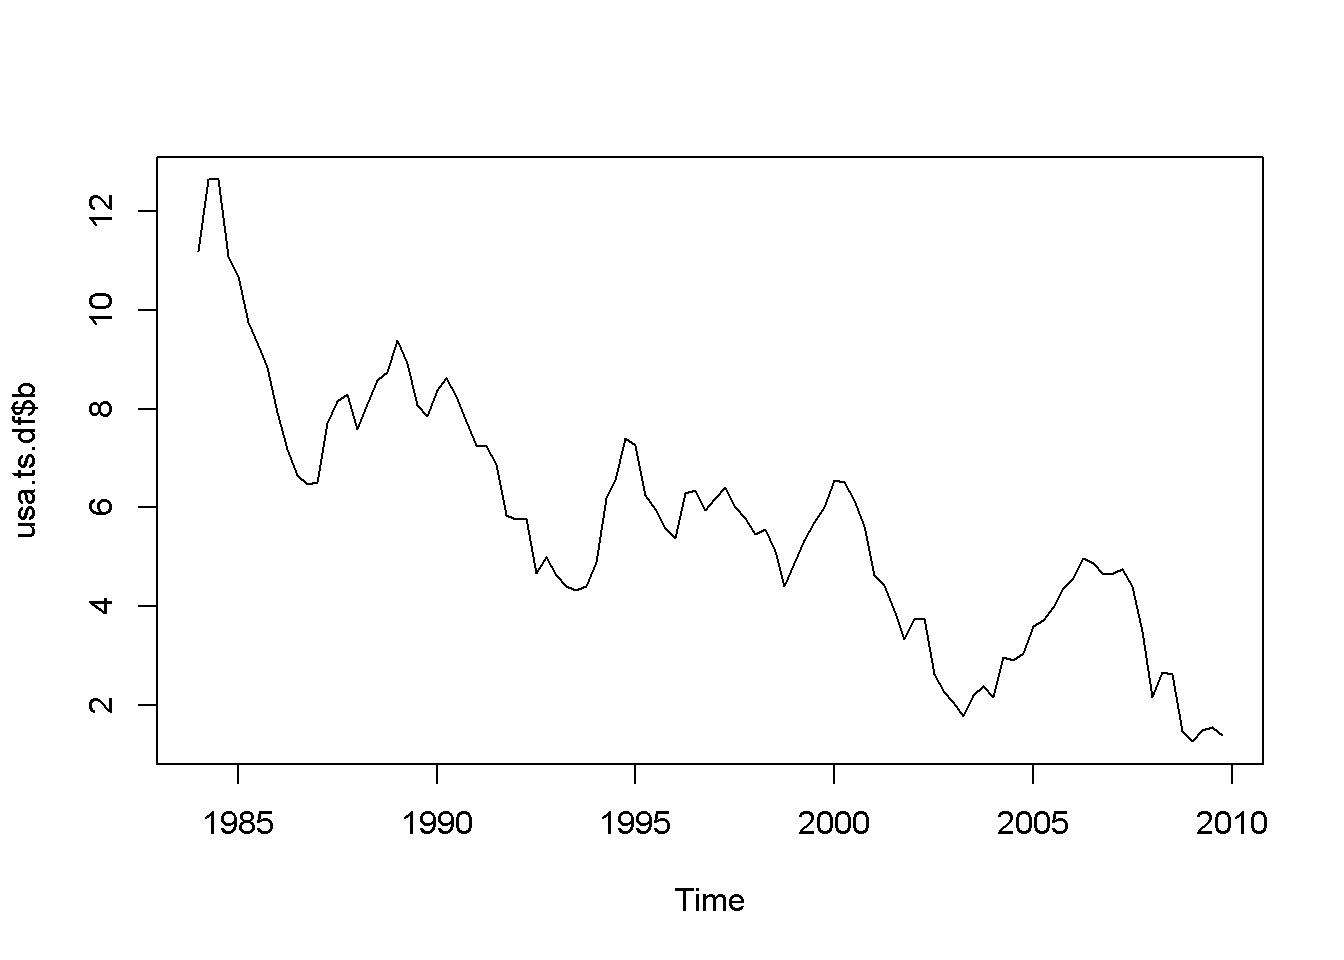 Various time series to illustrate nonstationarity